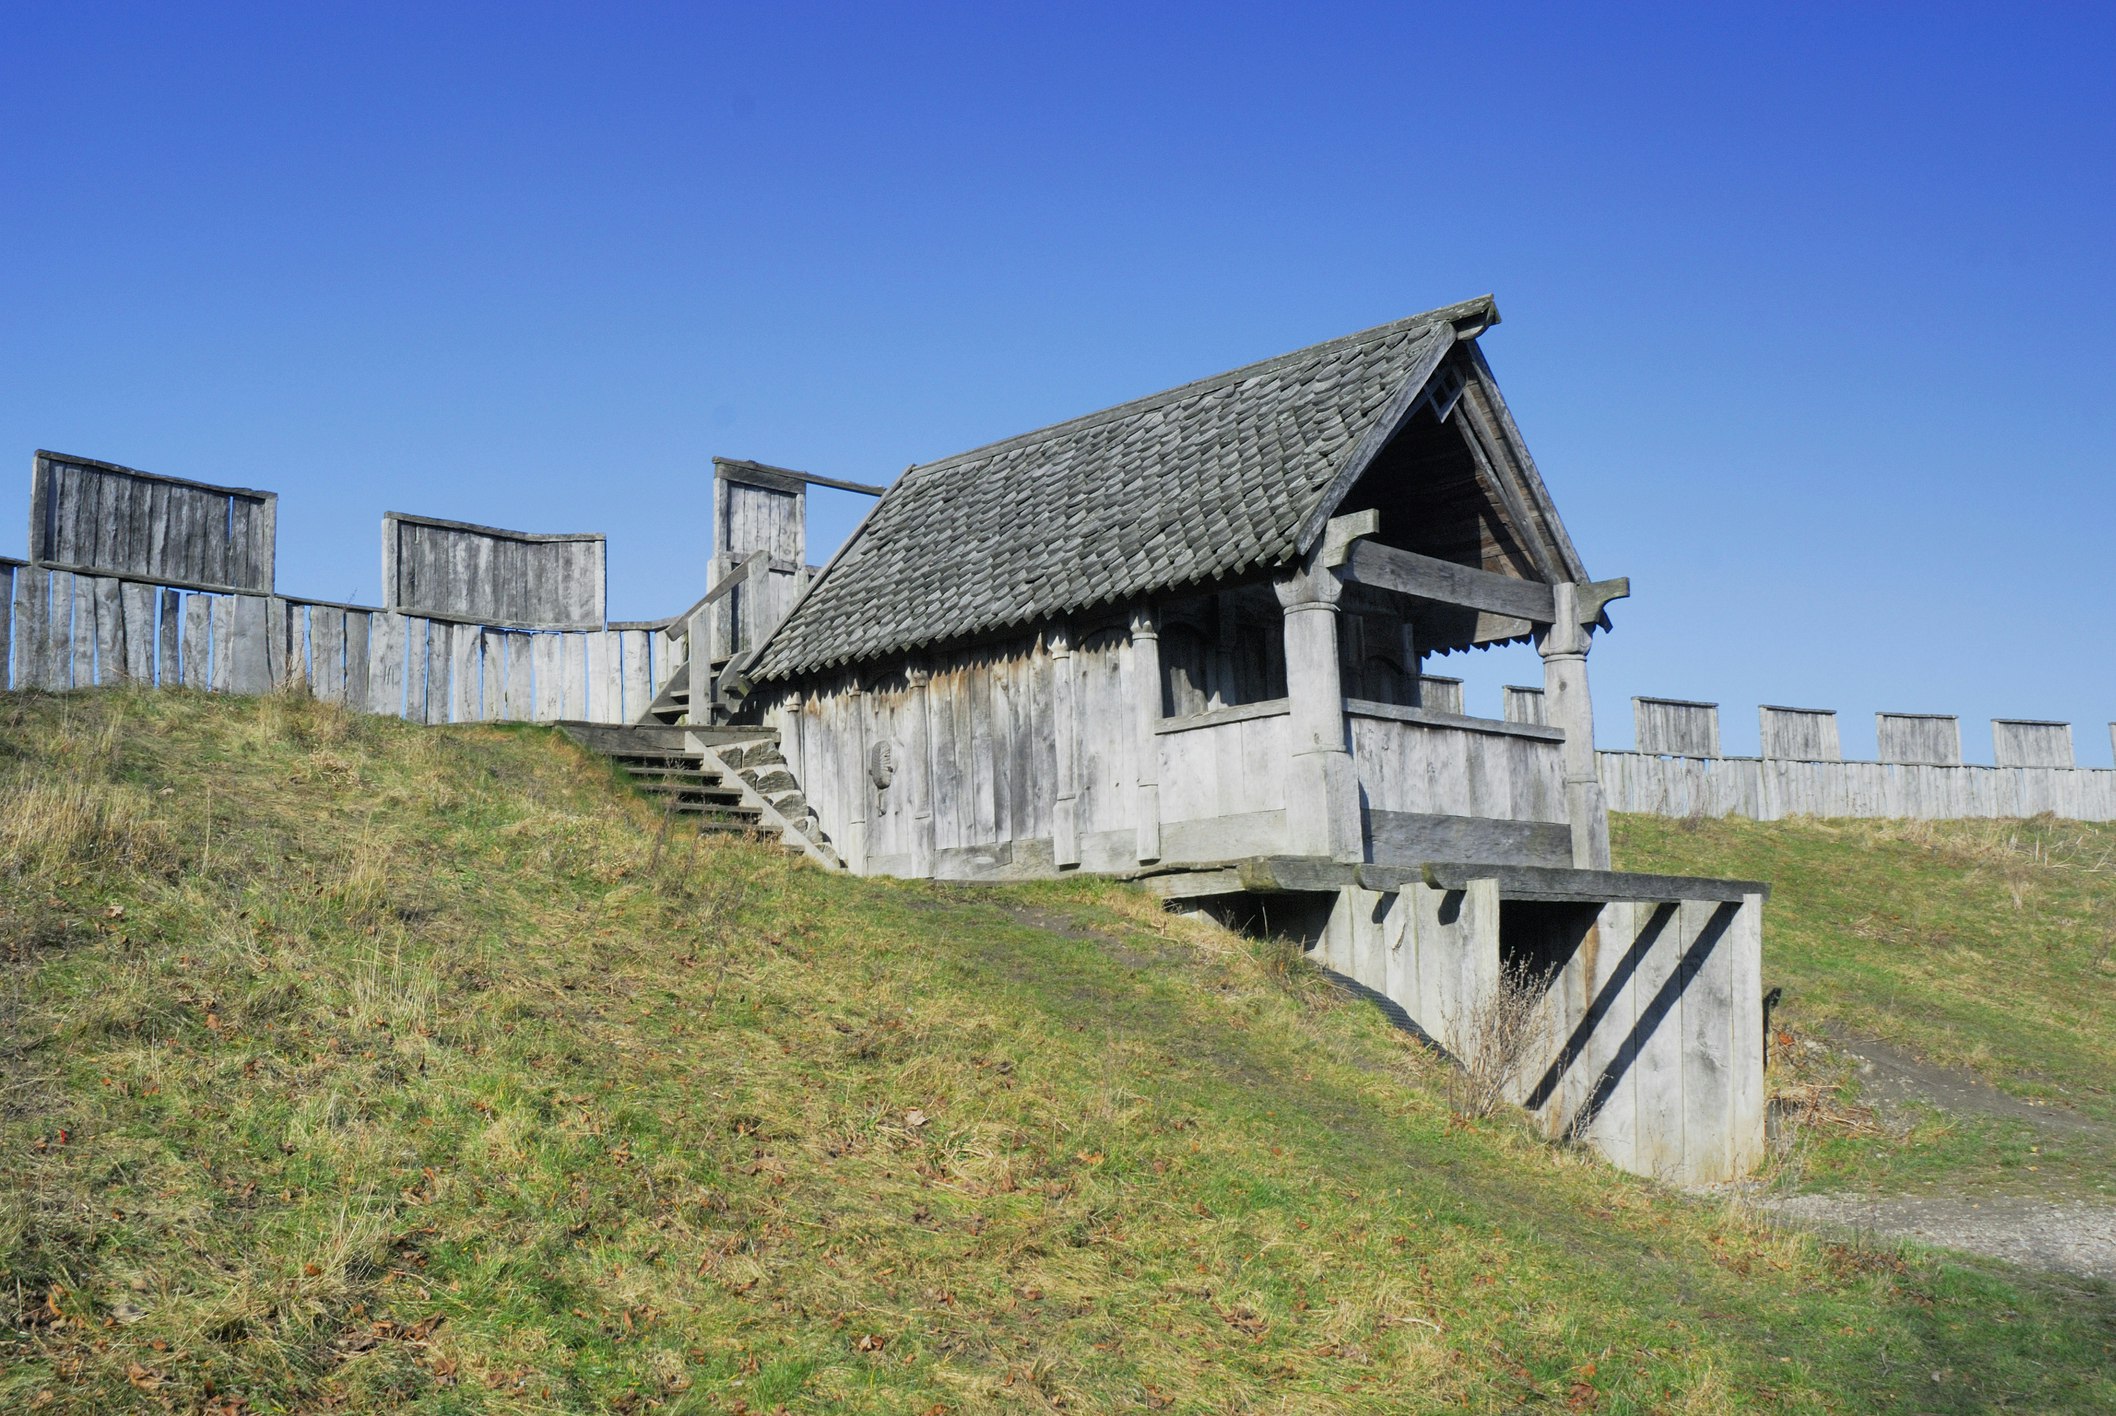 The grey, weathered wooden walls of a reconstructed Viking Fortress at Skåne in southern Sweden